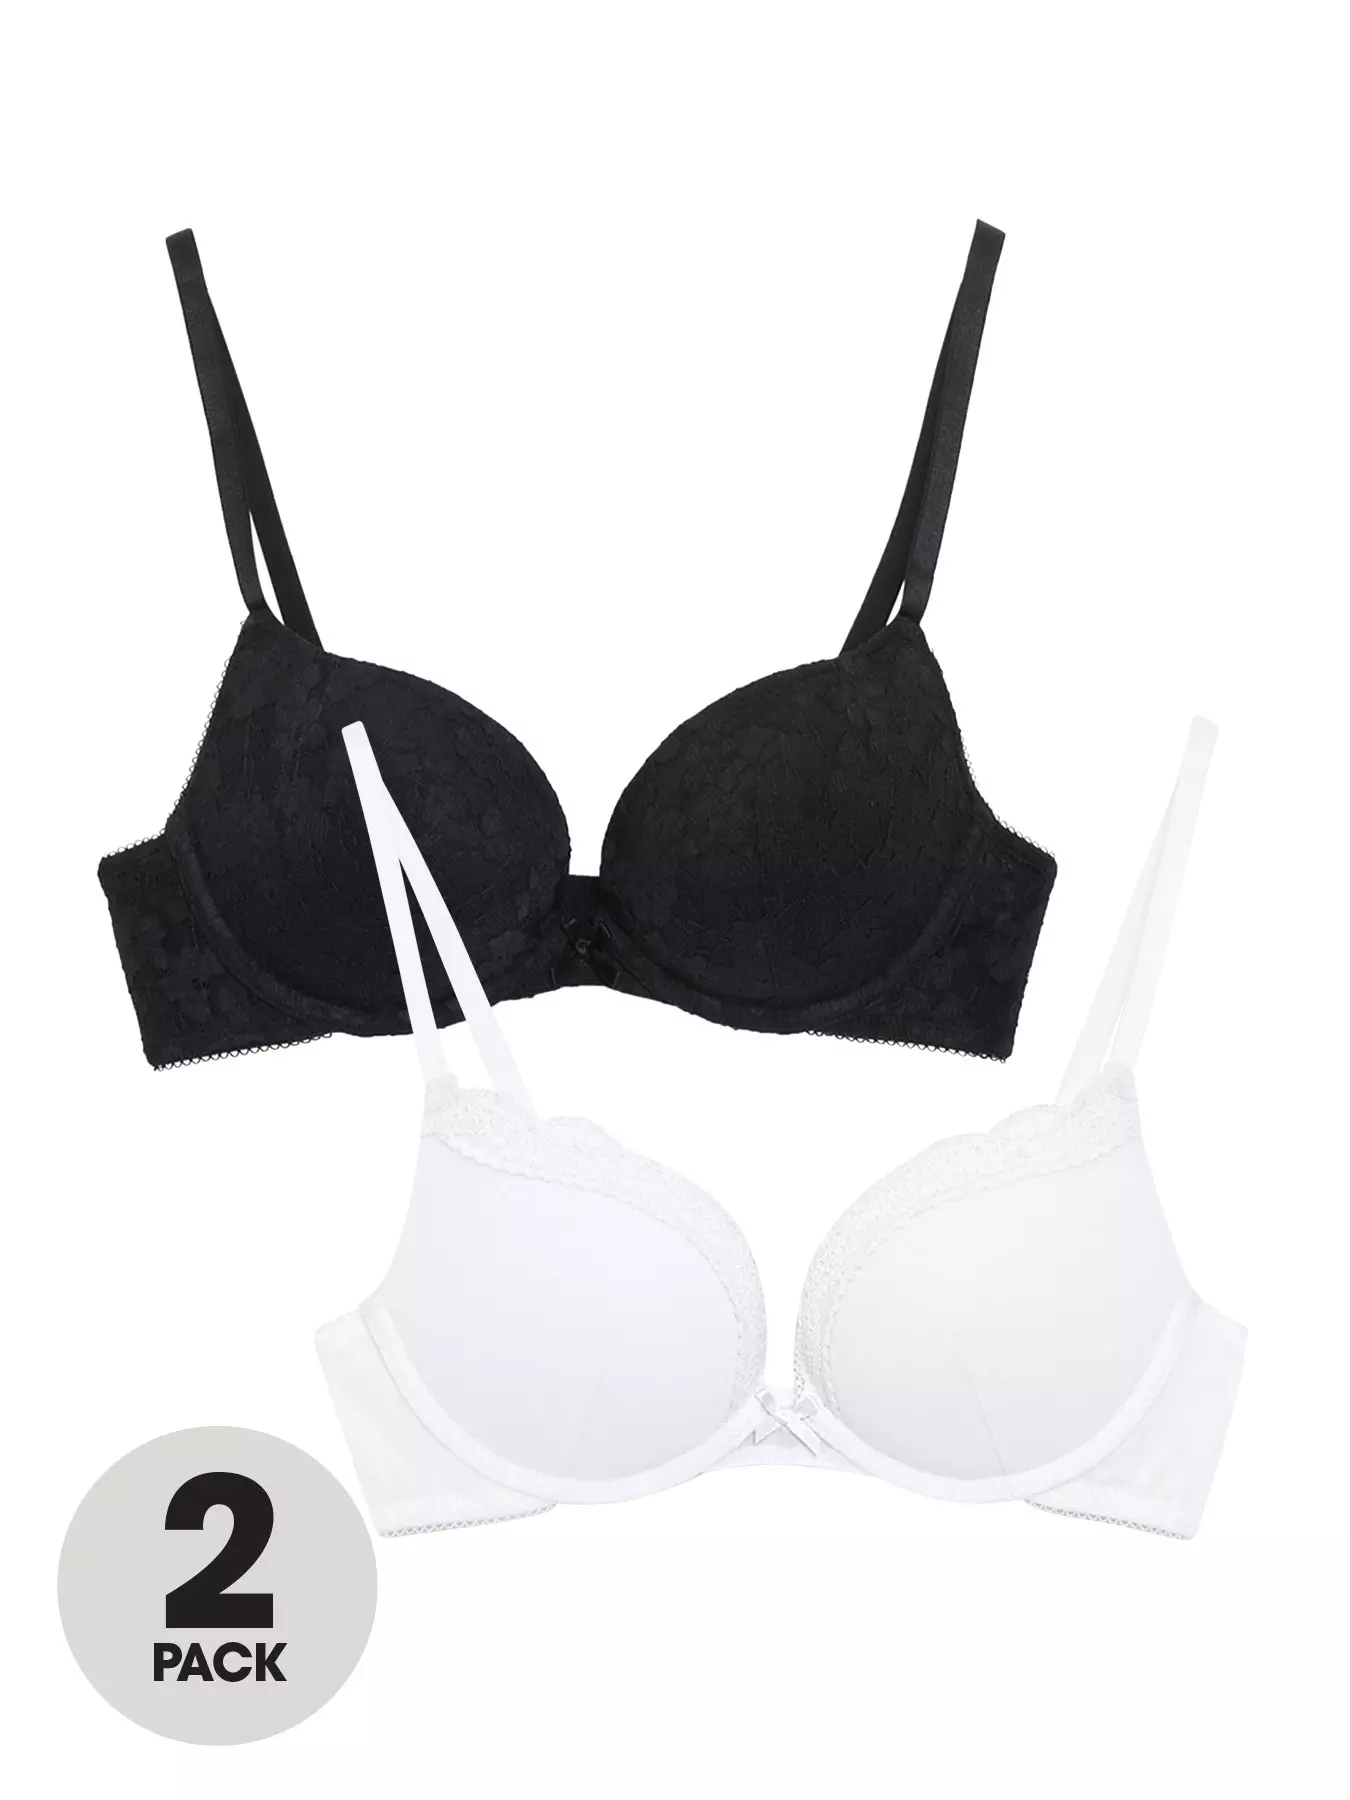 New Look 2 Pack Black And White T-shirt Bras